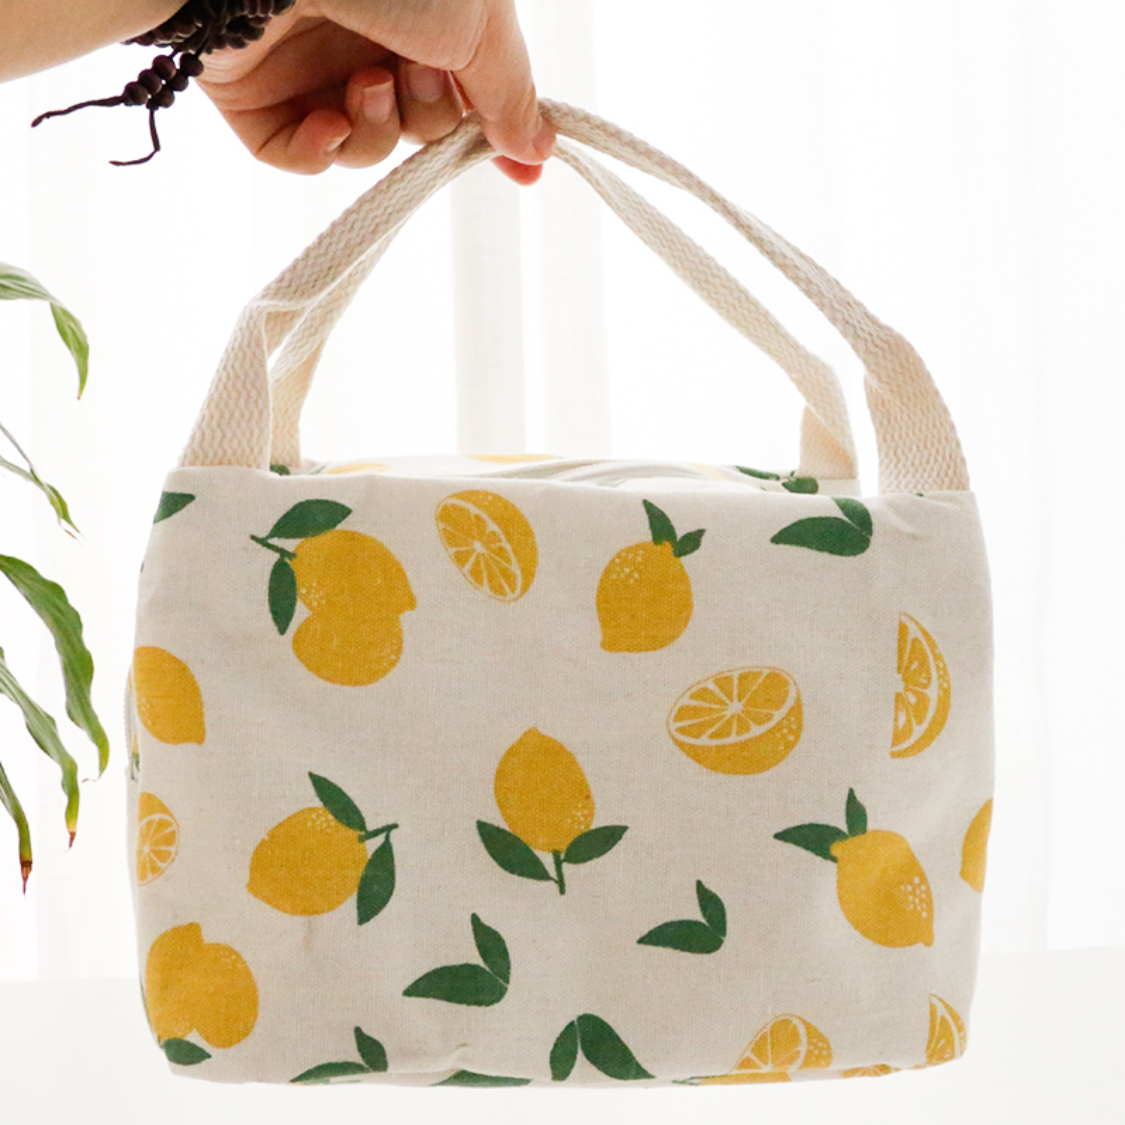 Fruit Print Lunch Insulated Cooler Bags For School Kids